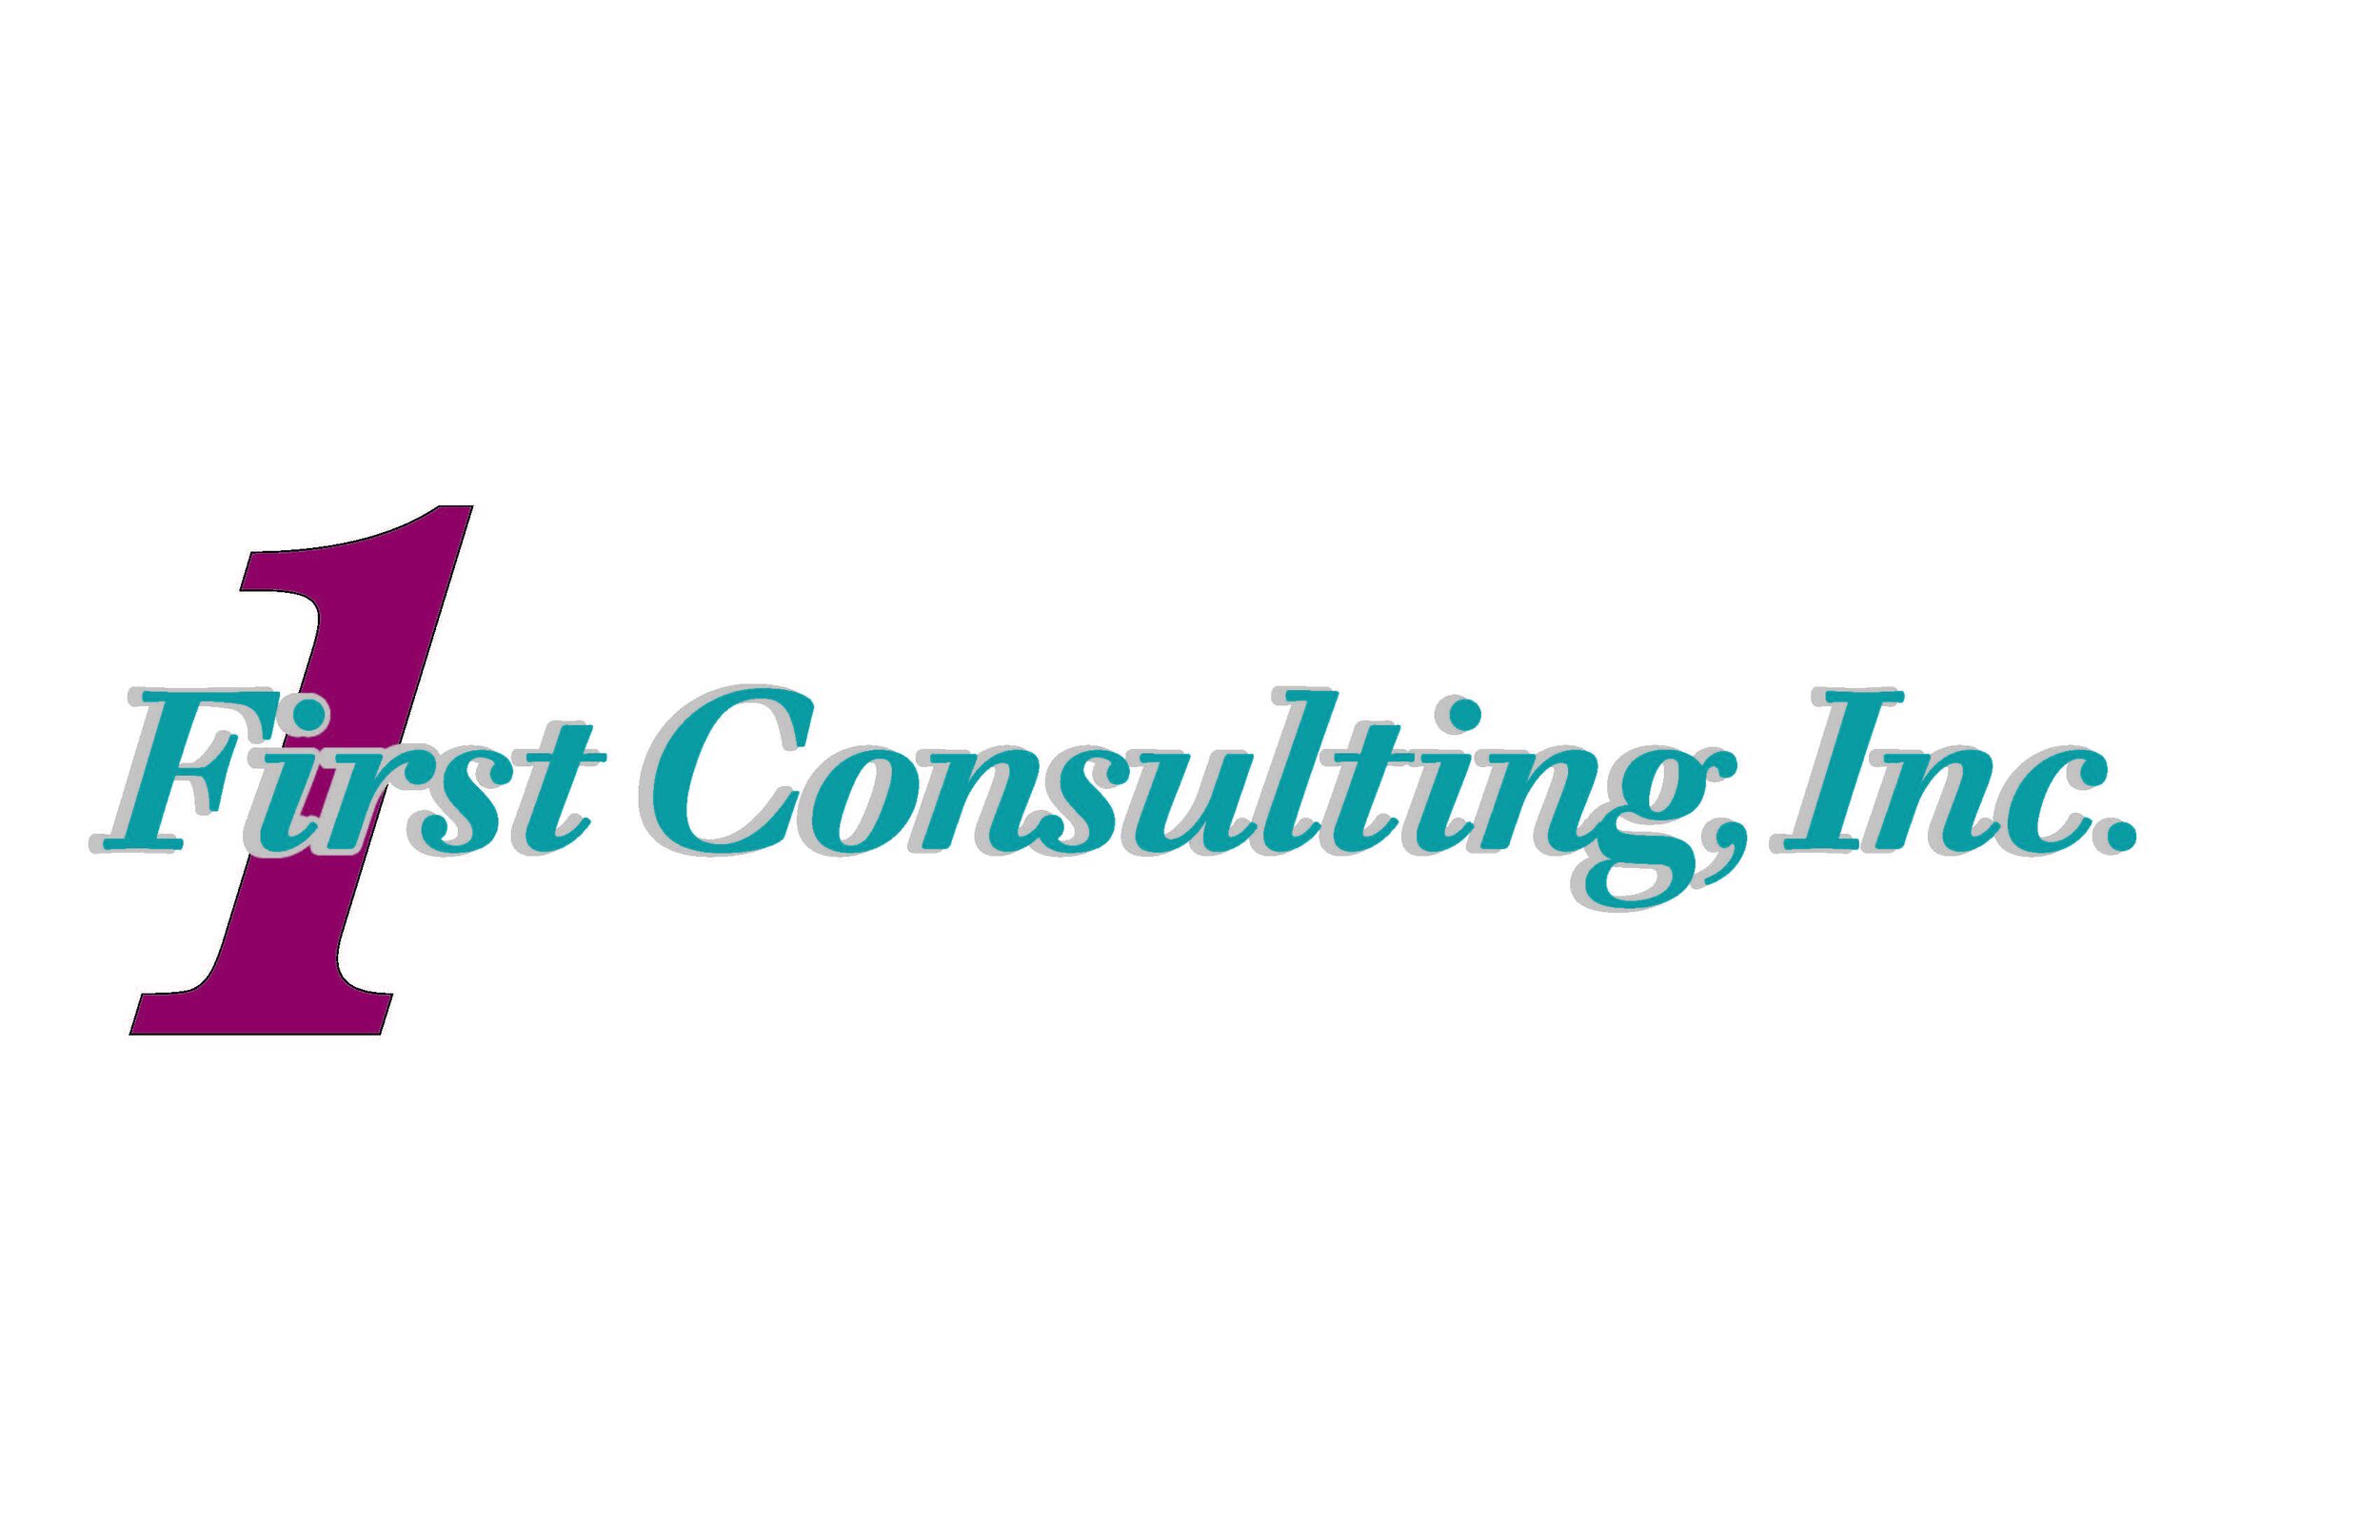 01 FIRST CONSULTING INC. LOGO TYPE.jpg